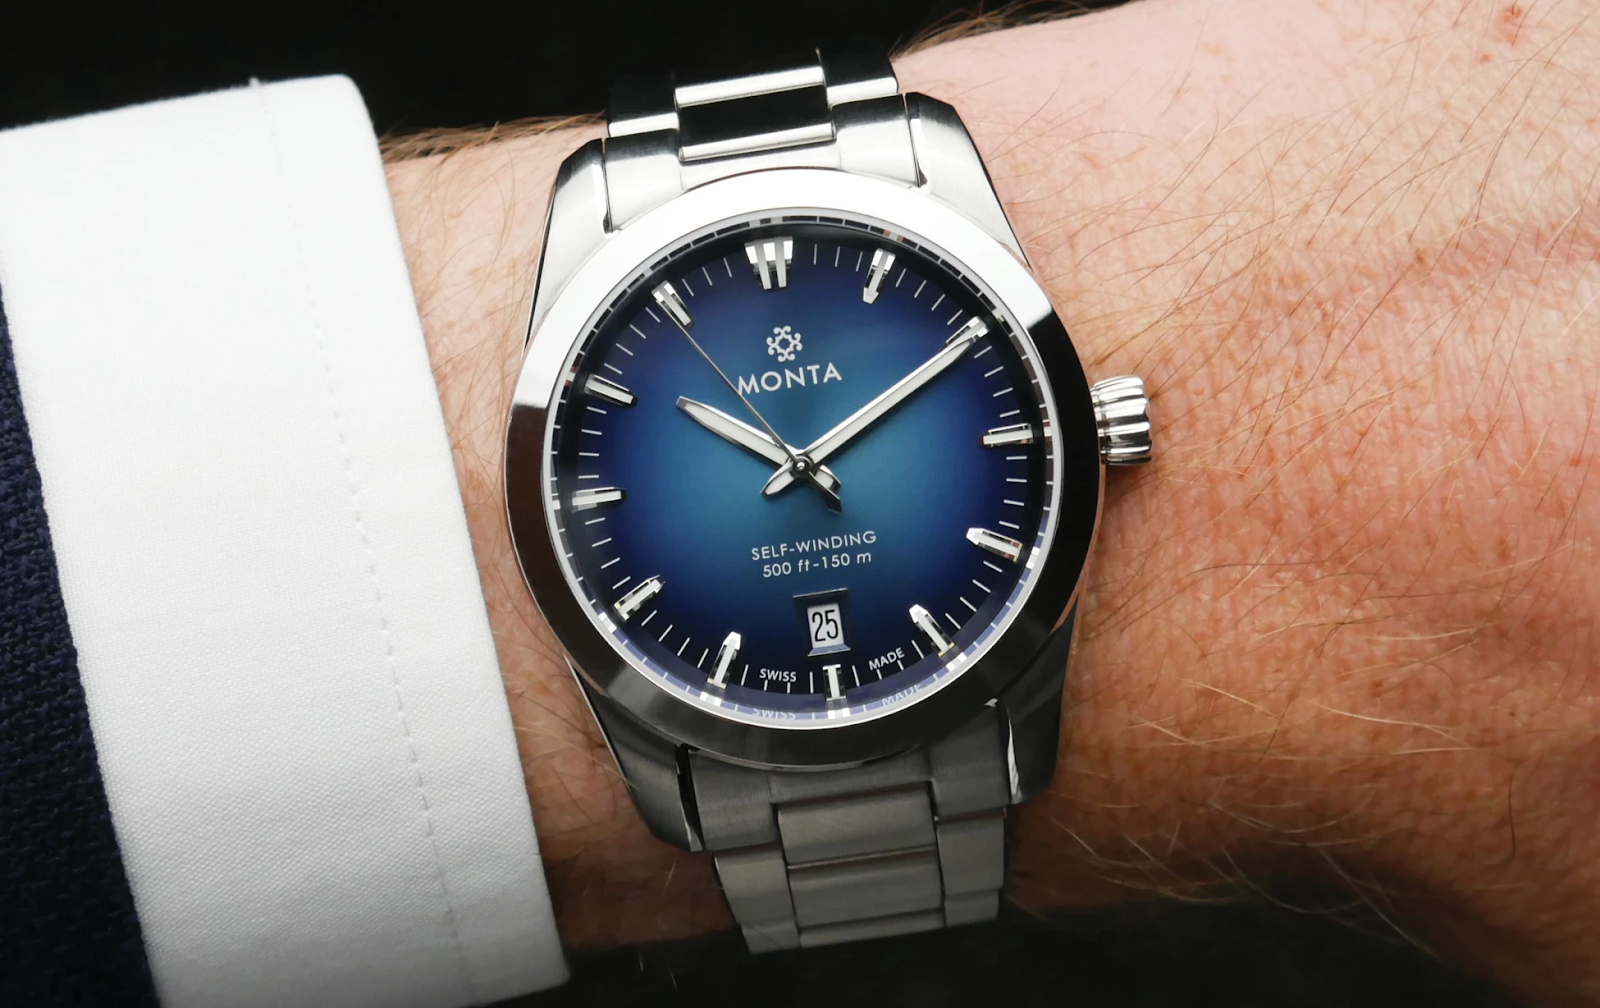 MONTA noble watch with blue dial